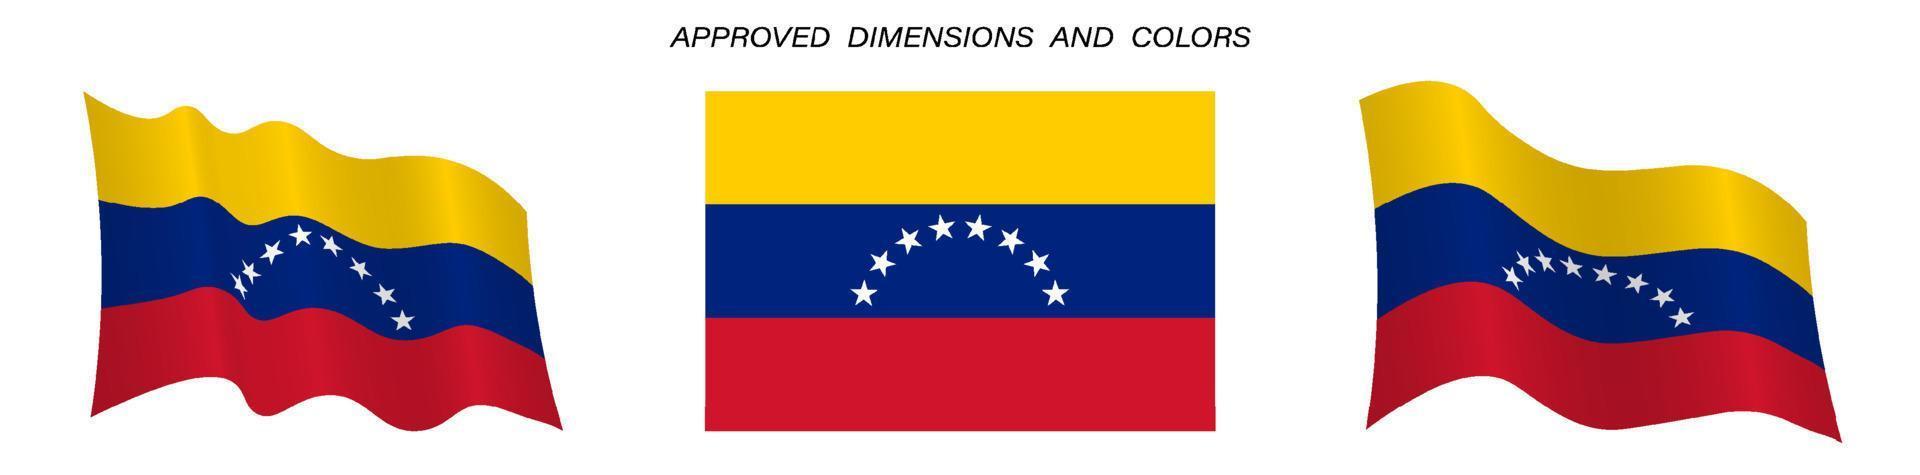 Venezuela flag in static position and in motion, fluttering in wind in exact colors and sizes, on white background vector